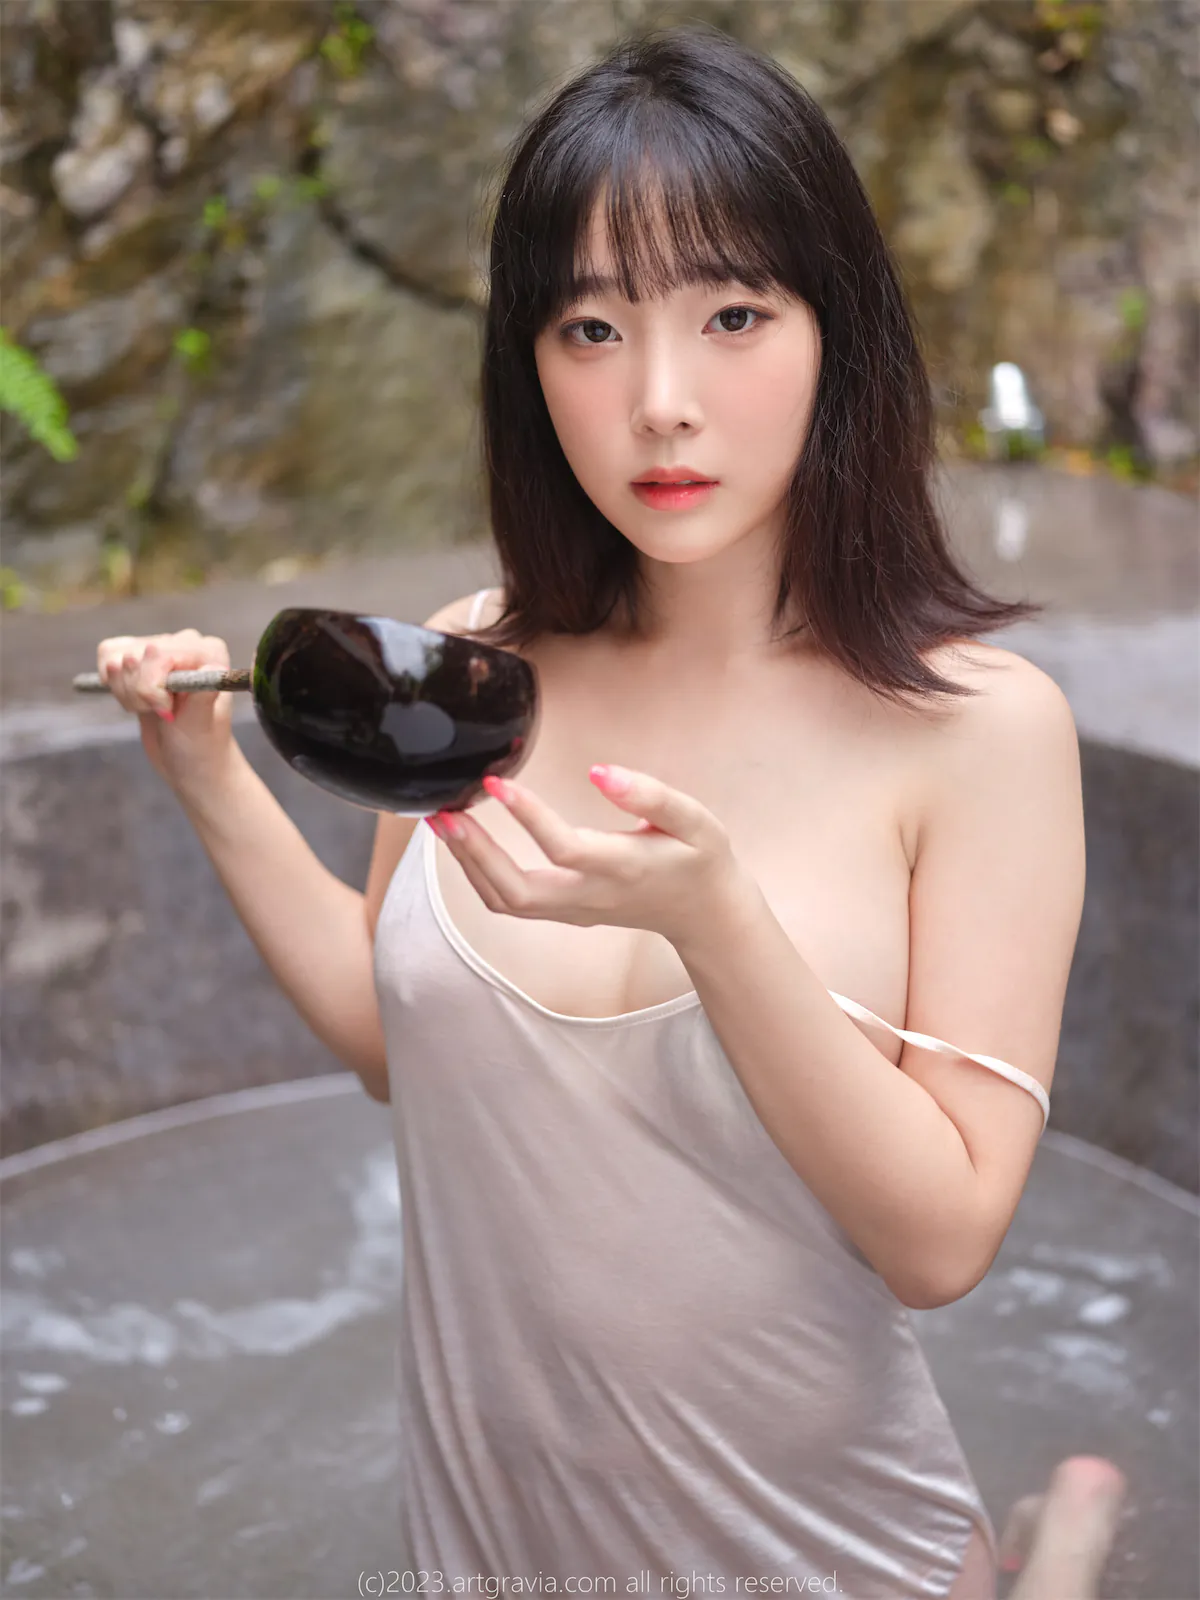 AG.492-Kang-In-kyung-coszip.com-018